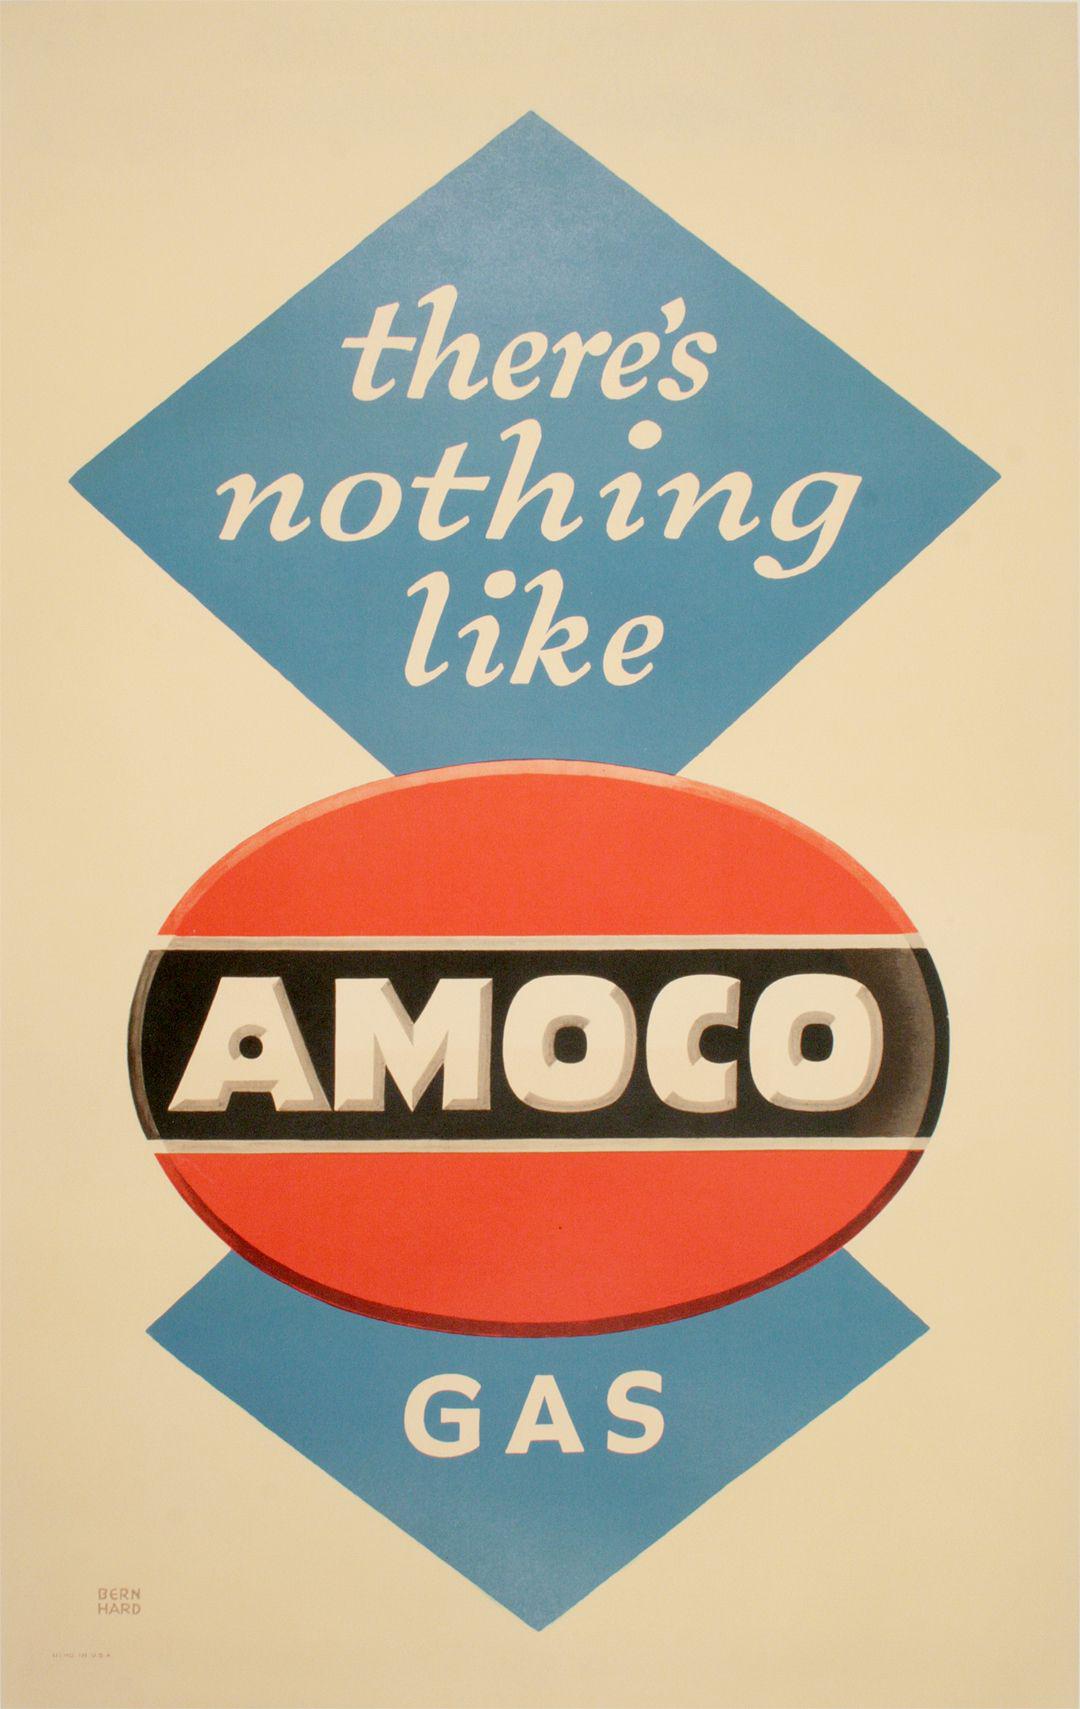 Original 1950's Lucian Bernhard Poster for Amoco - There's Nothing Like Amoco Gas